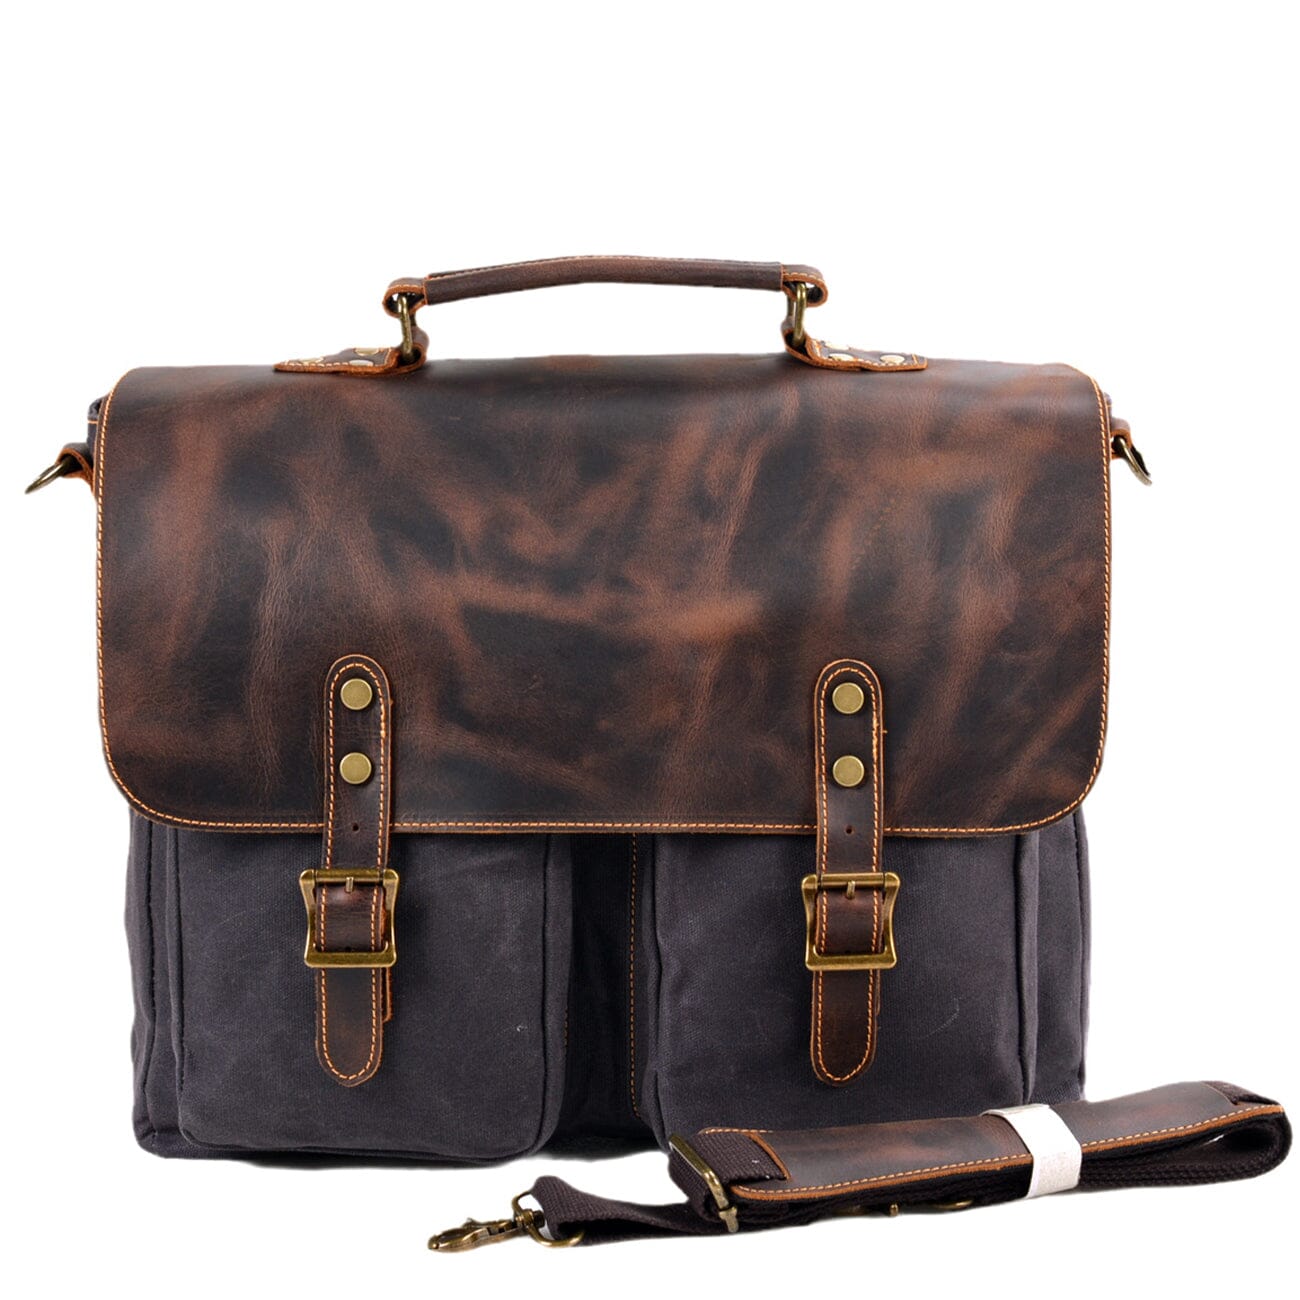 Mens Waxed Canvas Messenger Bag Full Grain Leather With Canvas